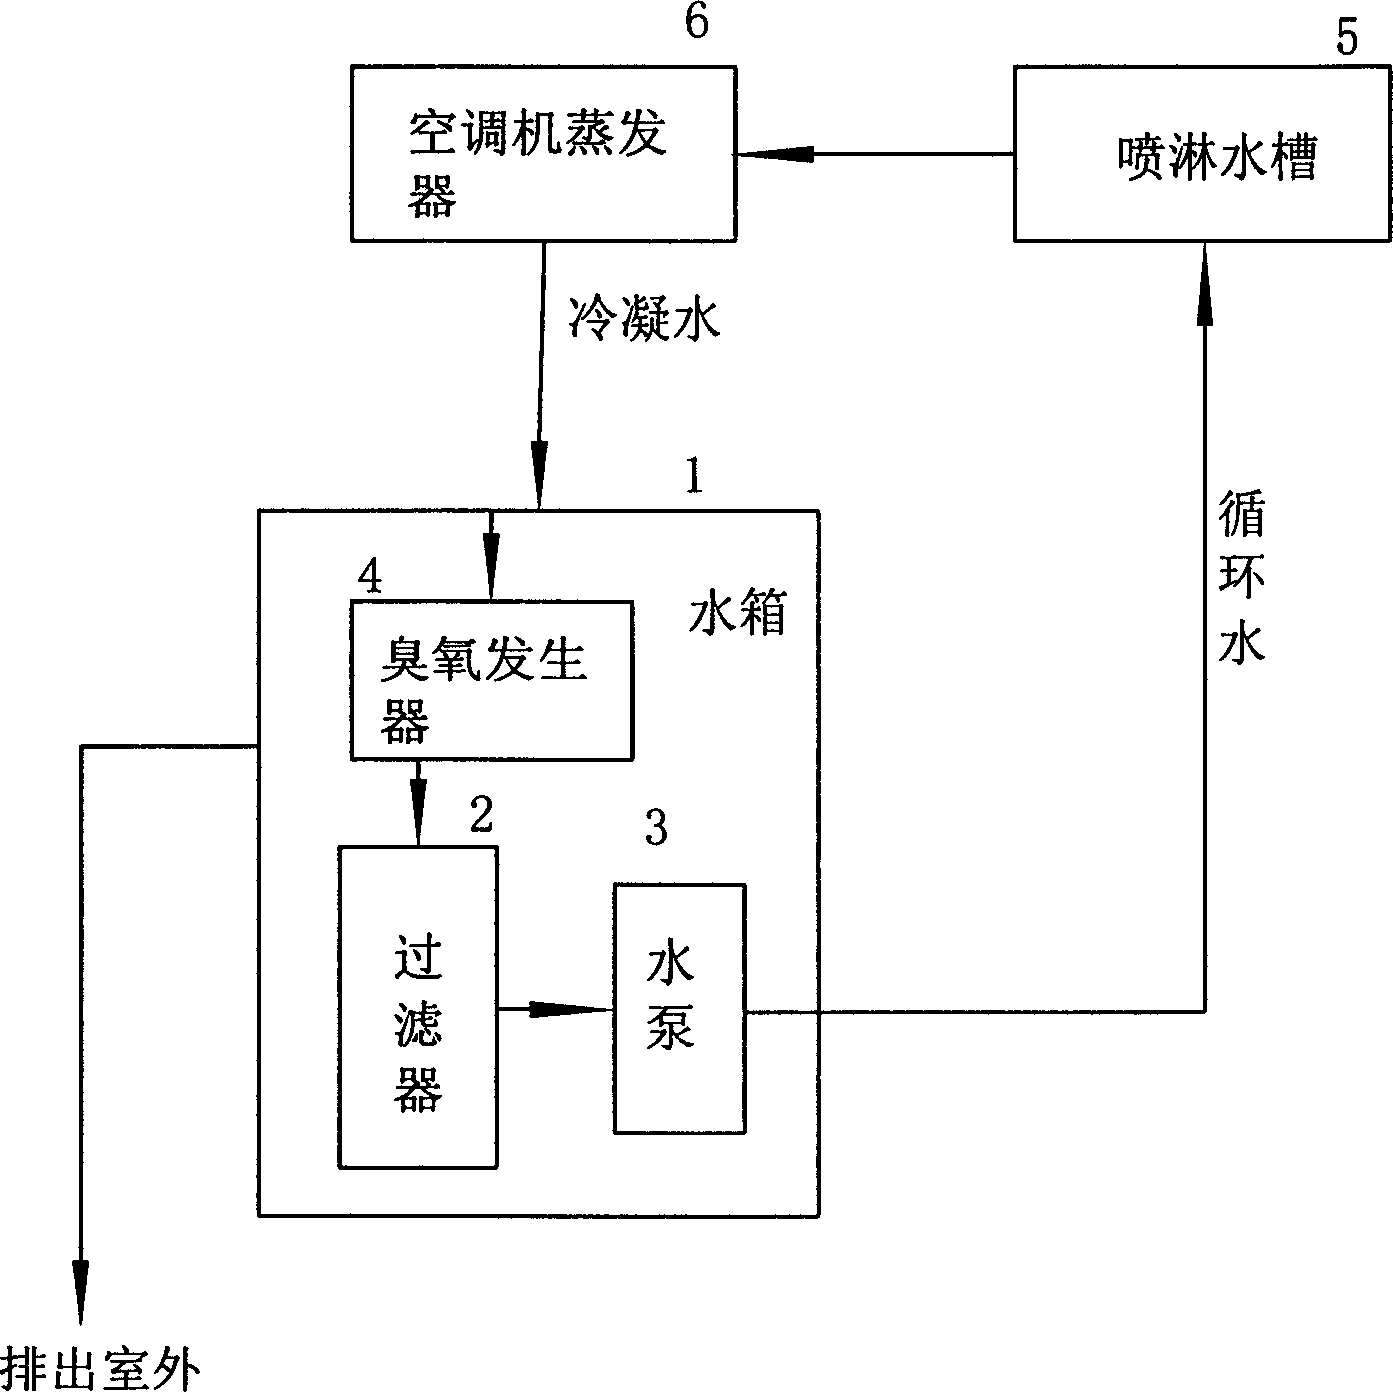 Method and apparatus for air moisture-holding purifying of single/central air conditioner